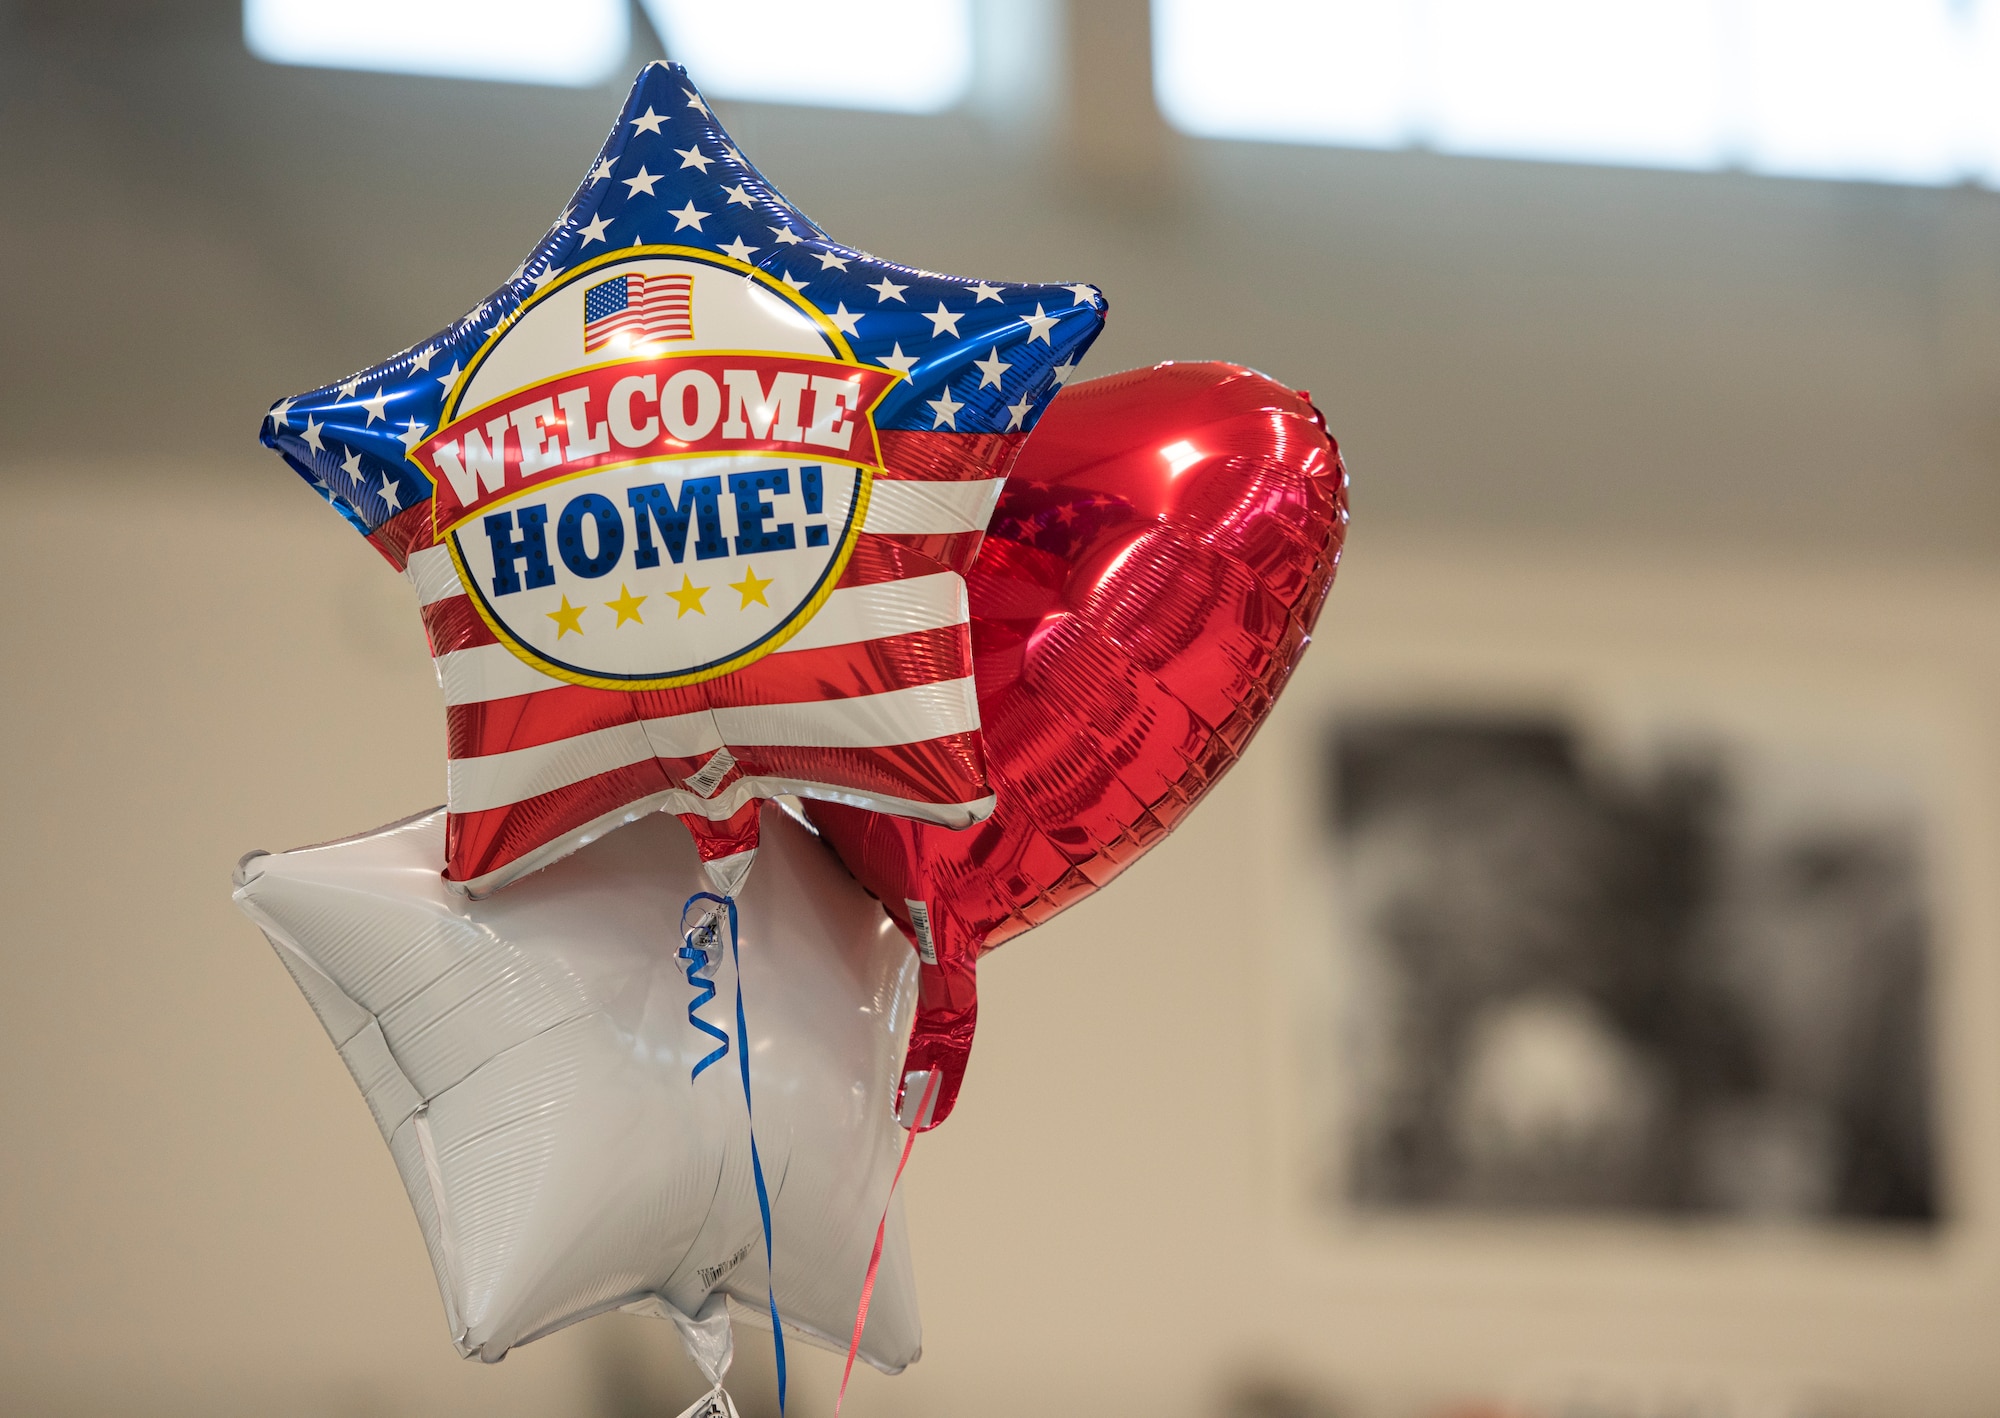 Friends and family bring balloons to welcome Airmen home from deployment, Jan. 26, 2020 at the 180FW in Swanton, Ohio.